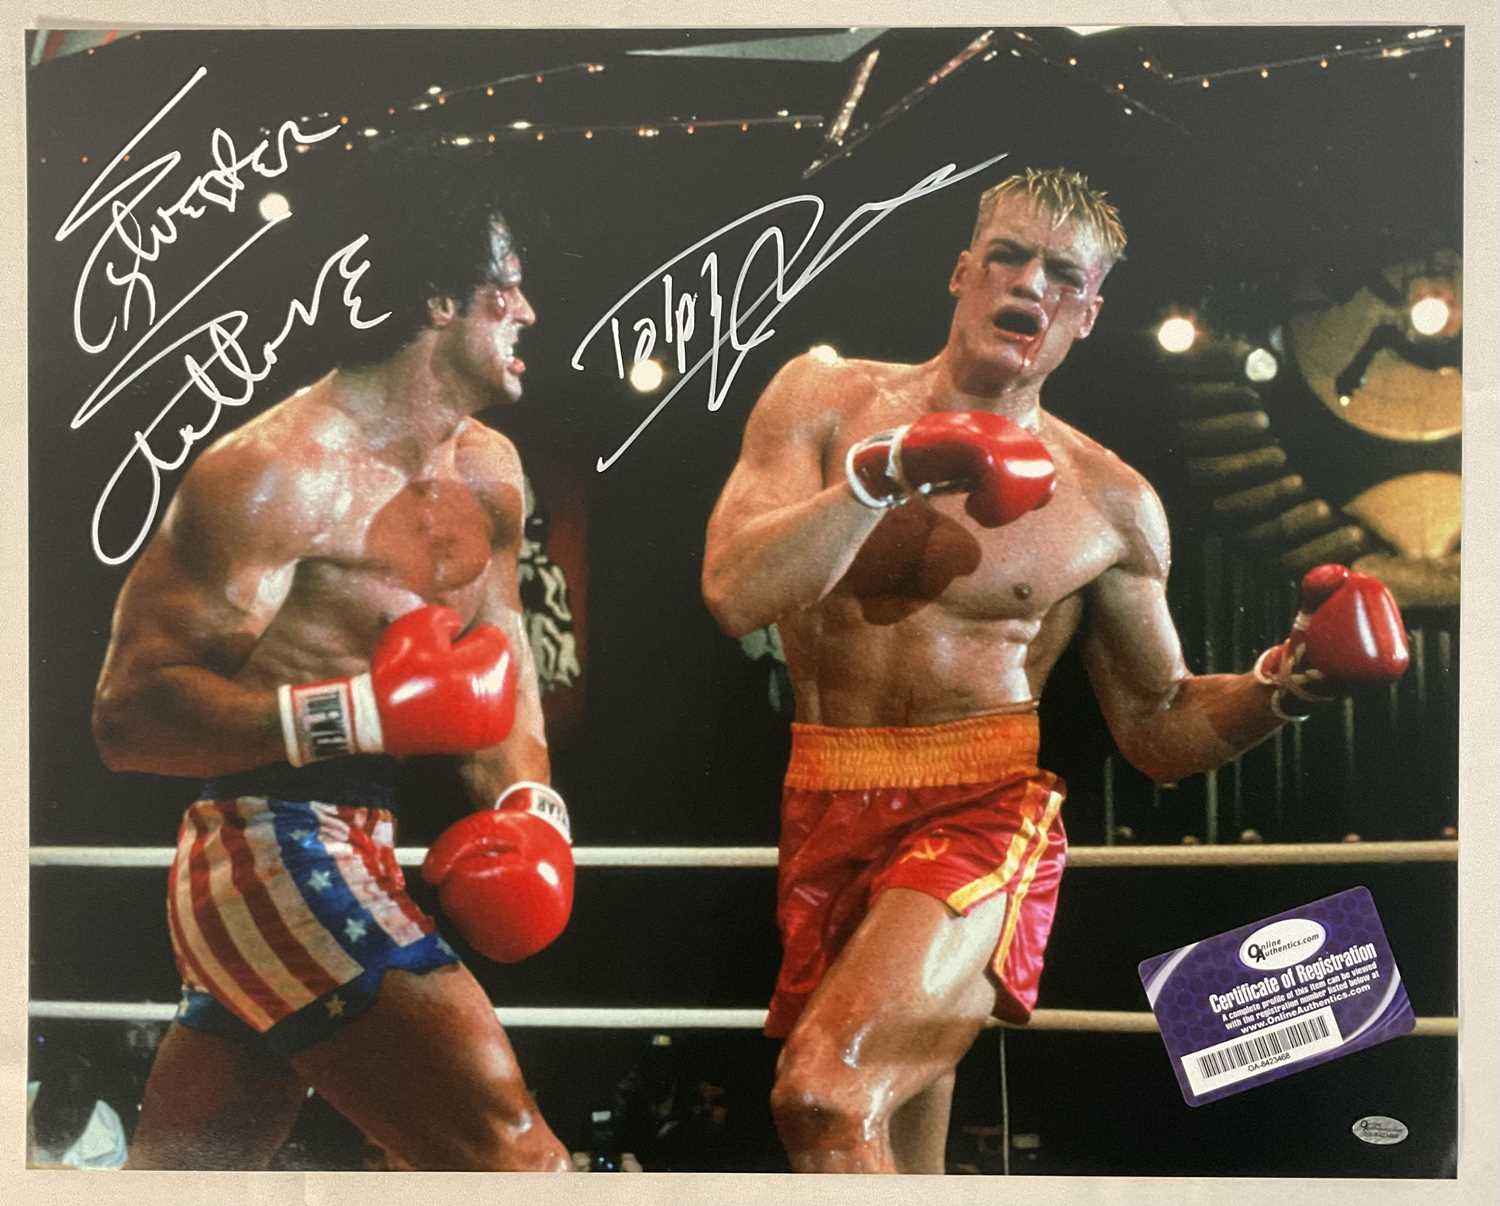 A 16" x 20" photographic still from ROCKY IV signed by SYLVESTER STALLONE and DOLPH LUNDGREN, with